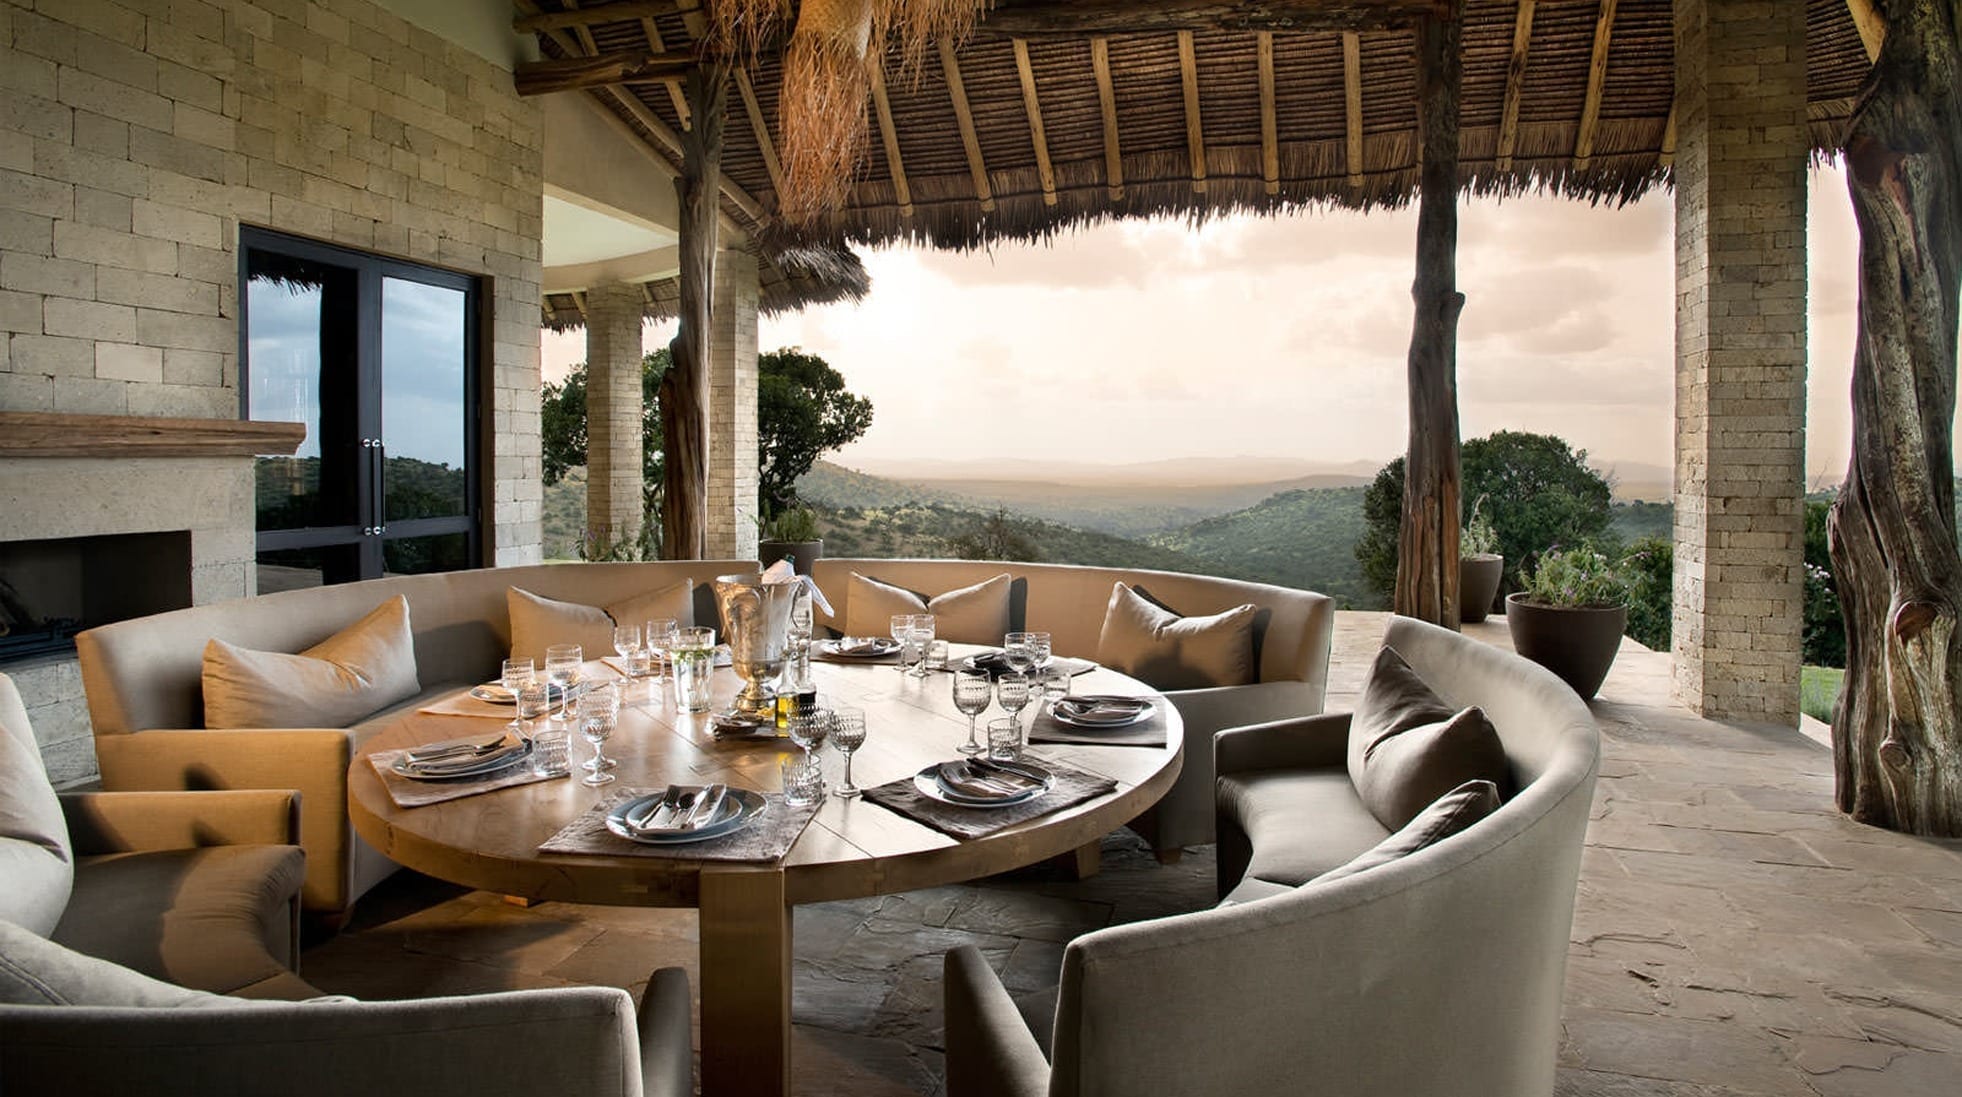 Dinner with a view at Sirai House, Kenya